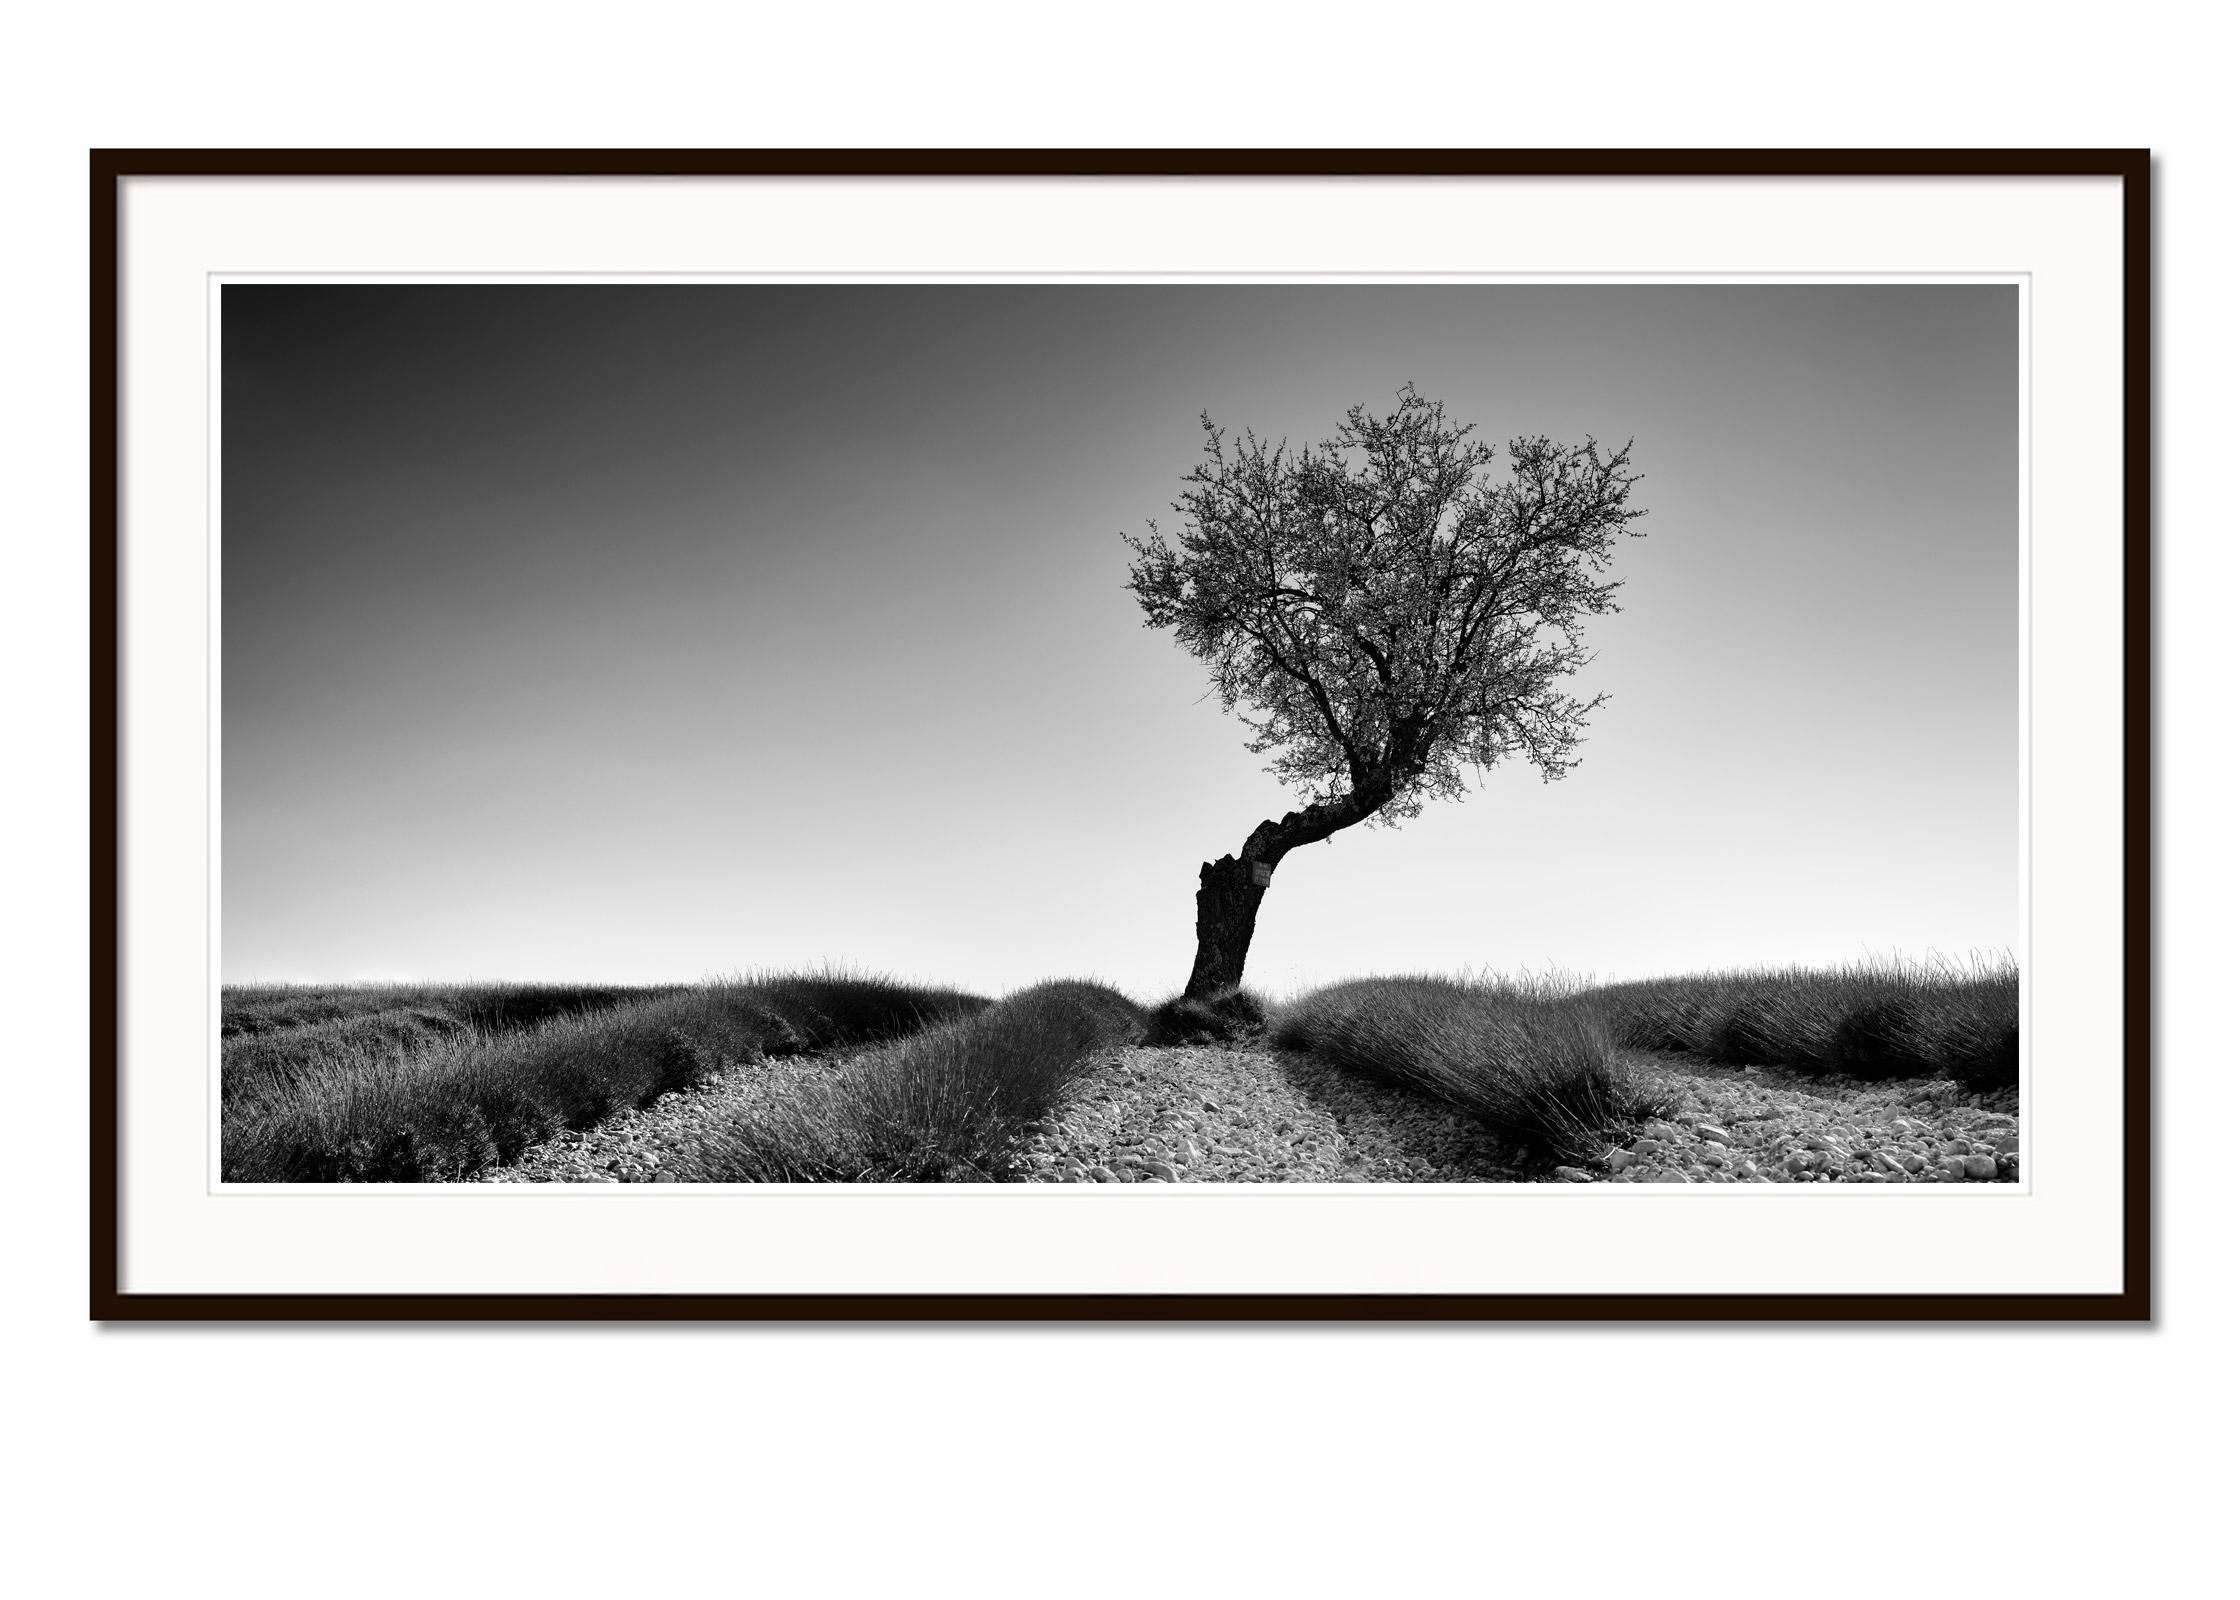 Black and white fine art landscape photography. Archival pigment ink print as part of a limited edition of 8. All Gerald Berghammer prints are made to order in limited editions on Hahnemuehle Photo Rag Baryta. Each print is stamped on the back and